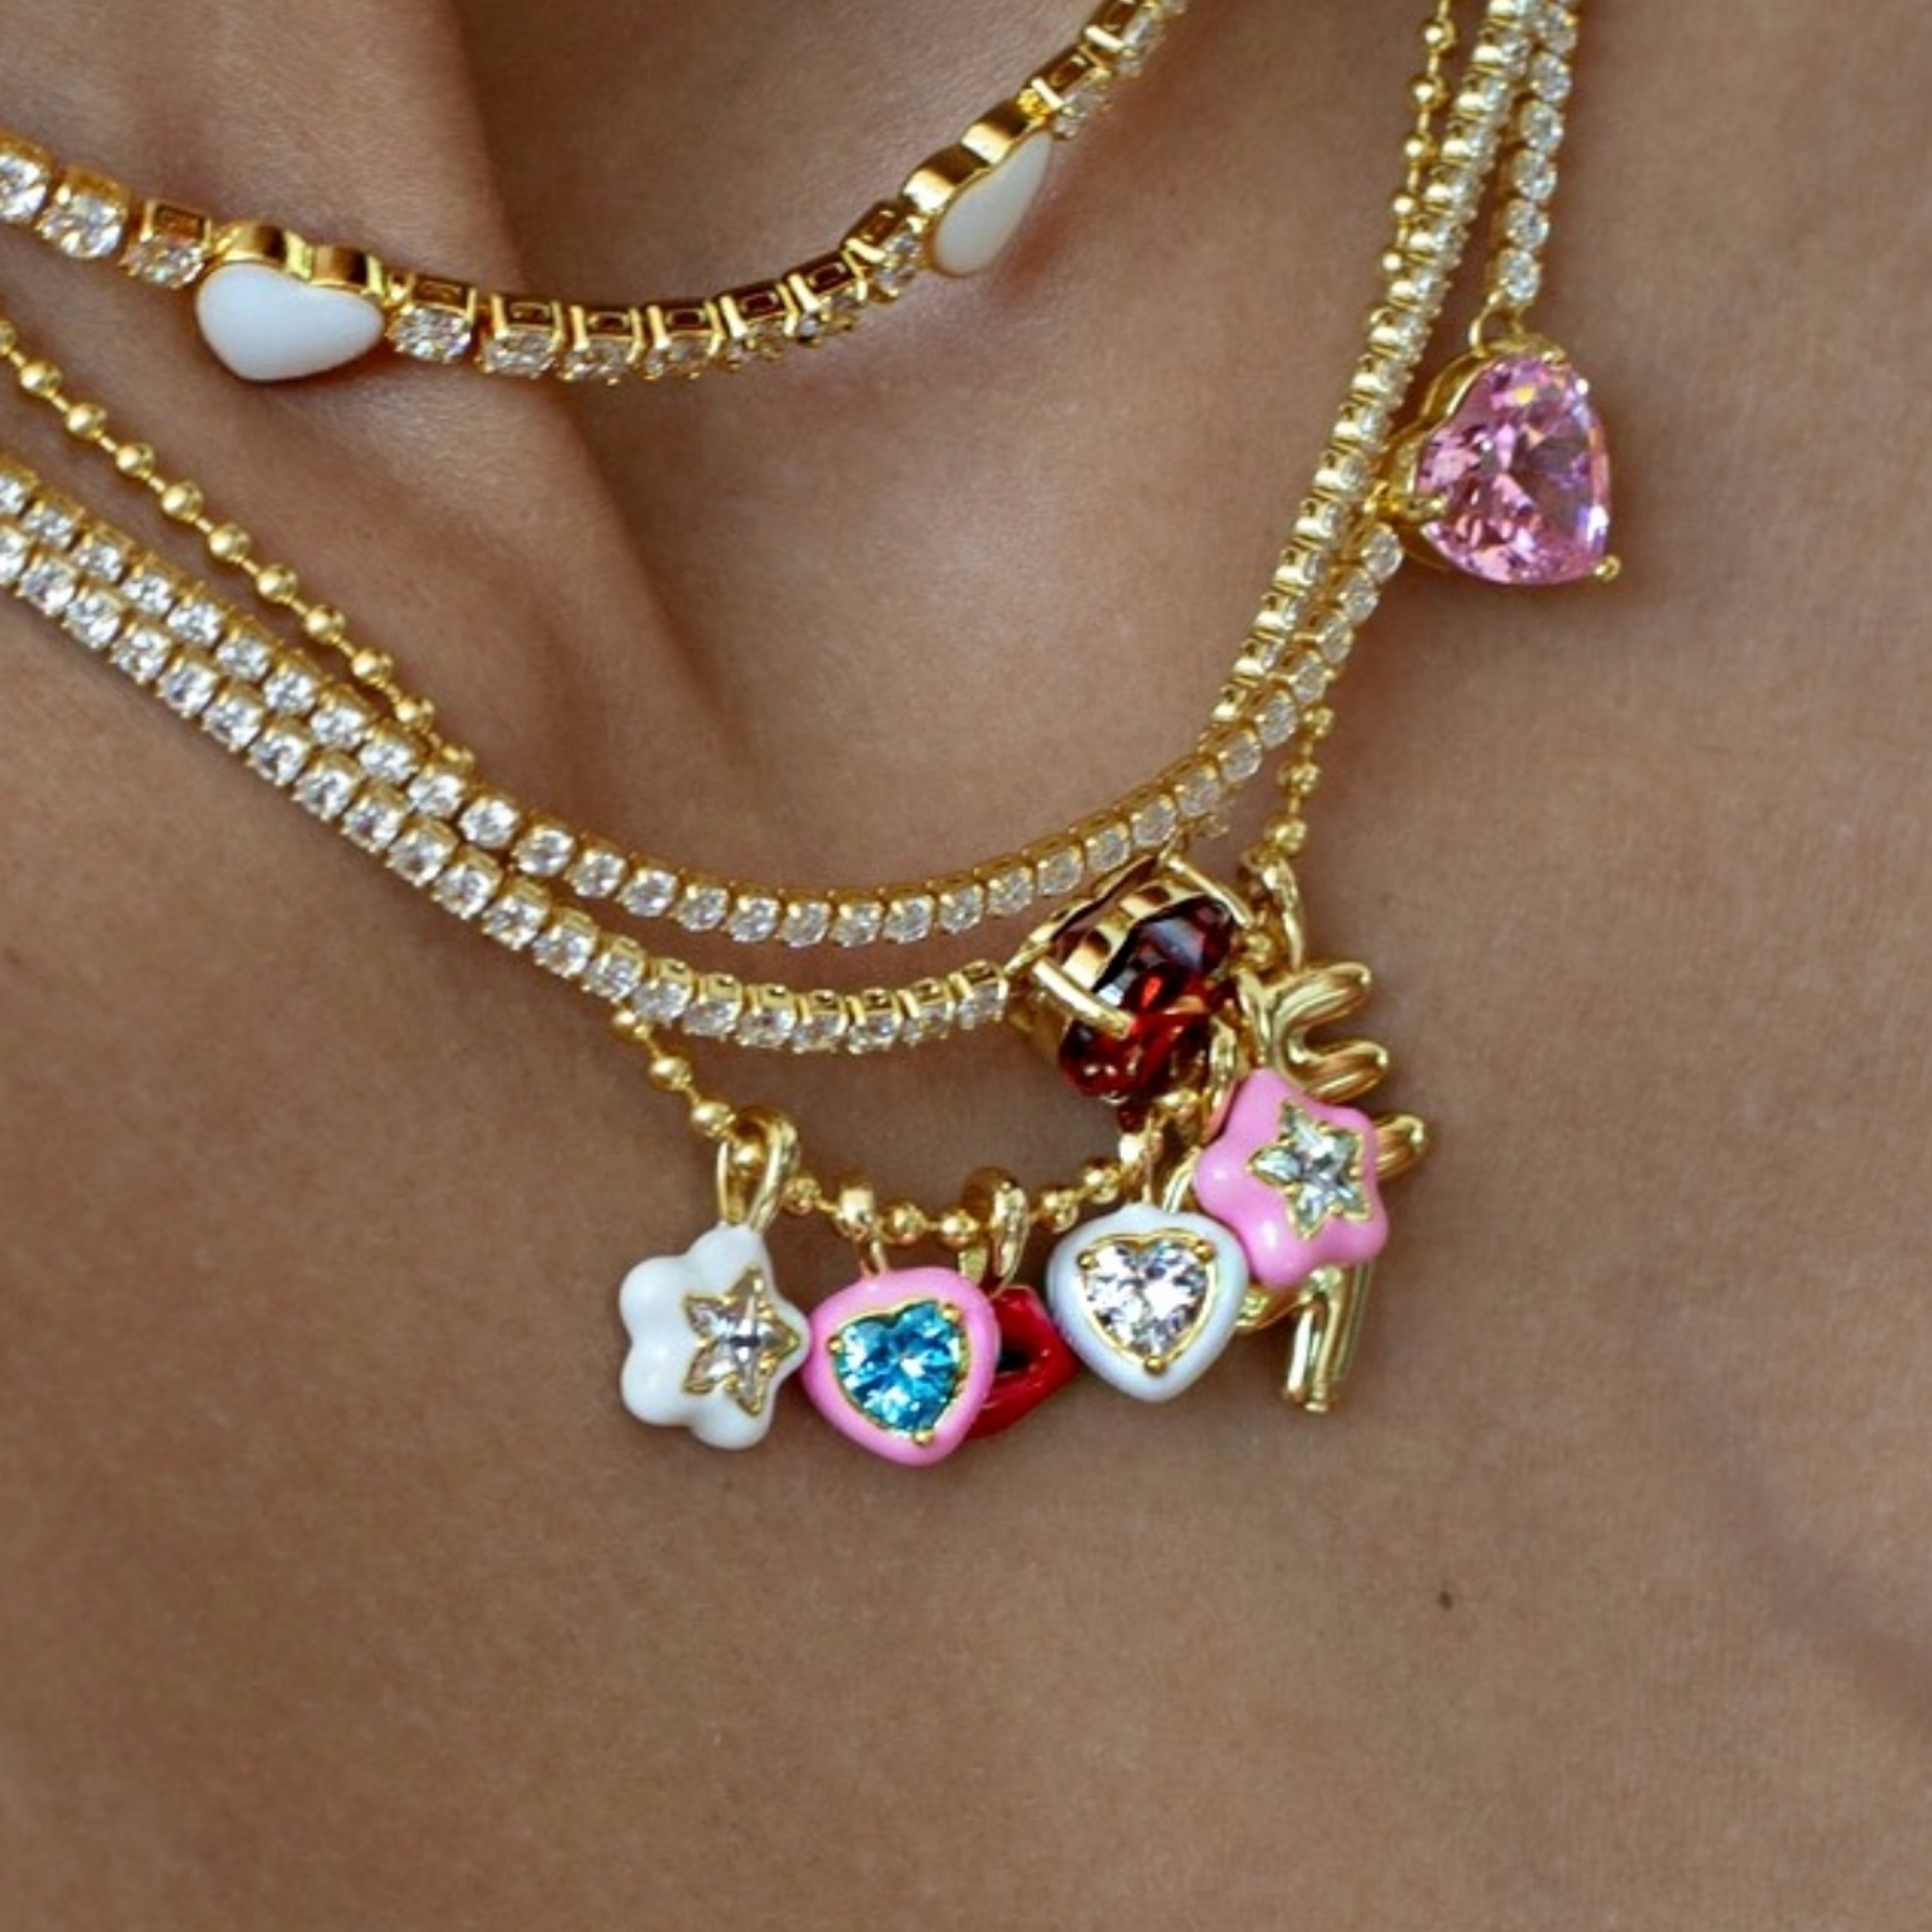 Build Your Puffy Lucky Charm Necklace